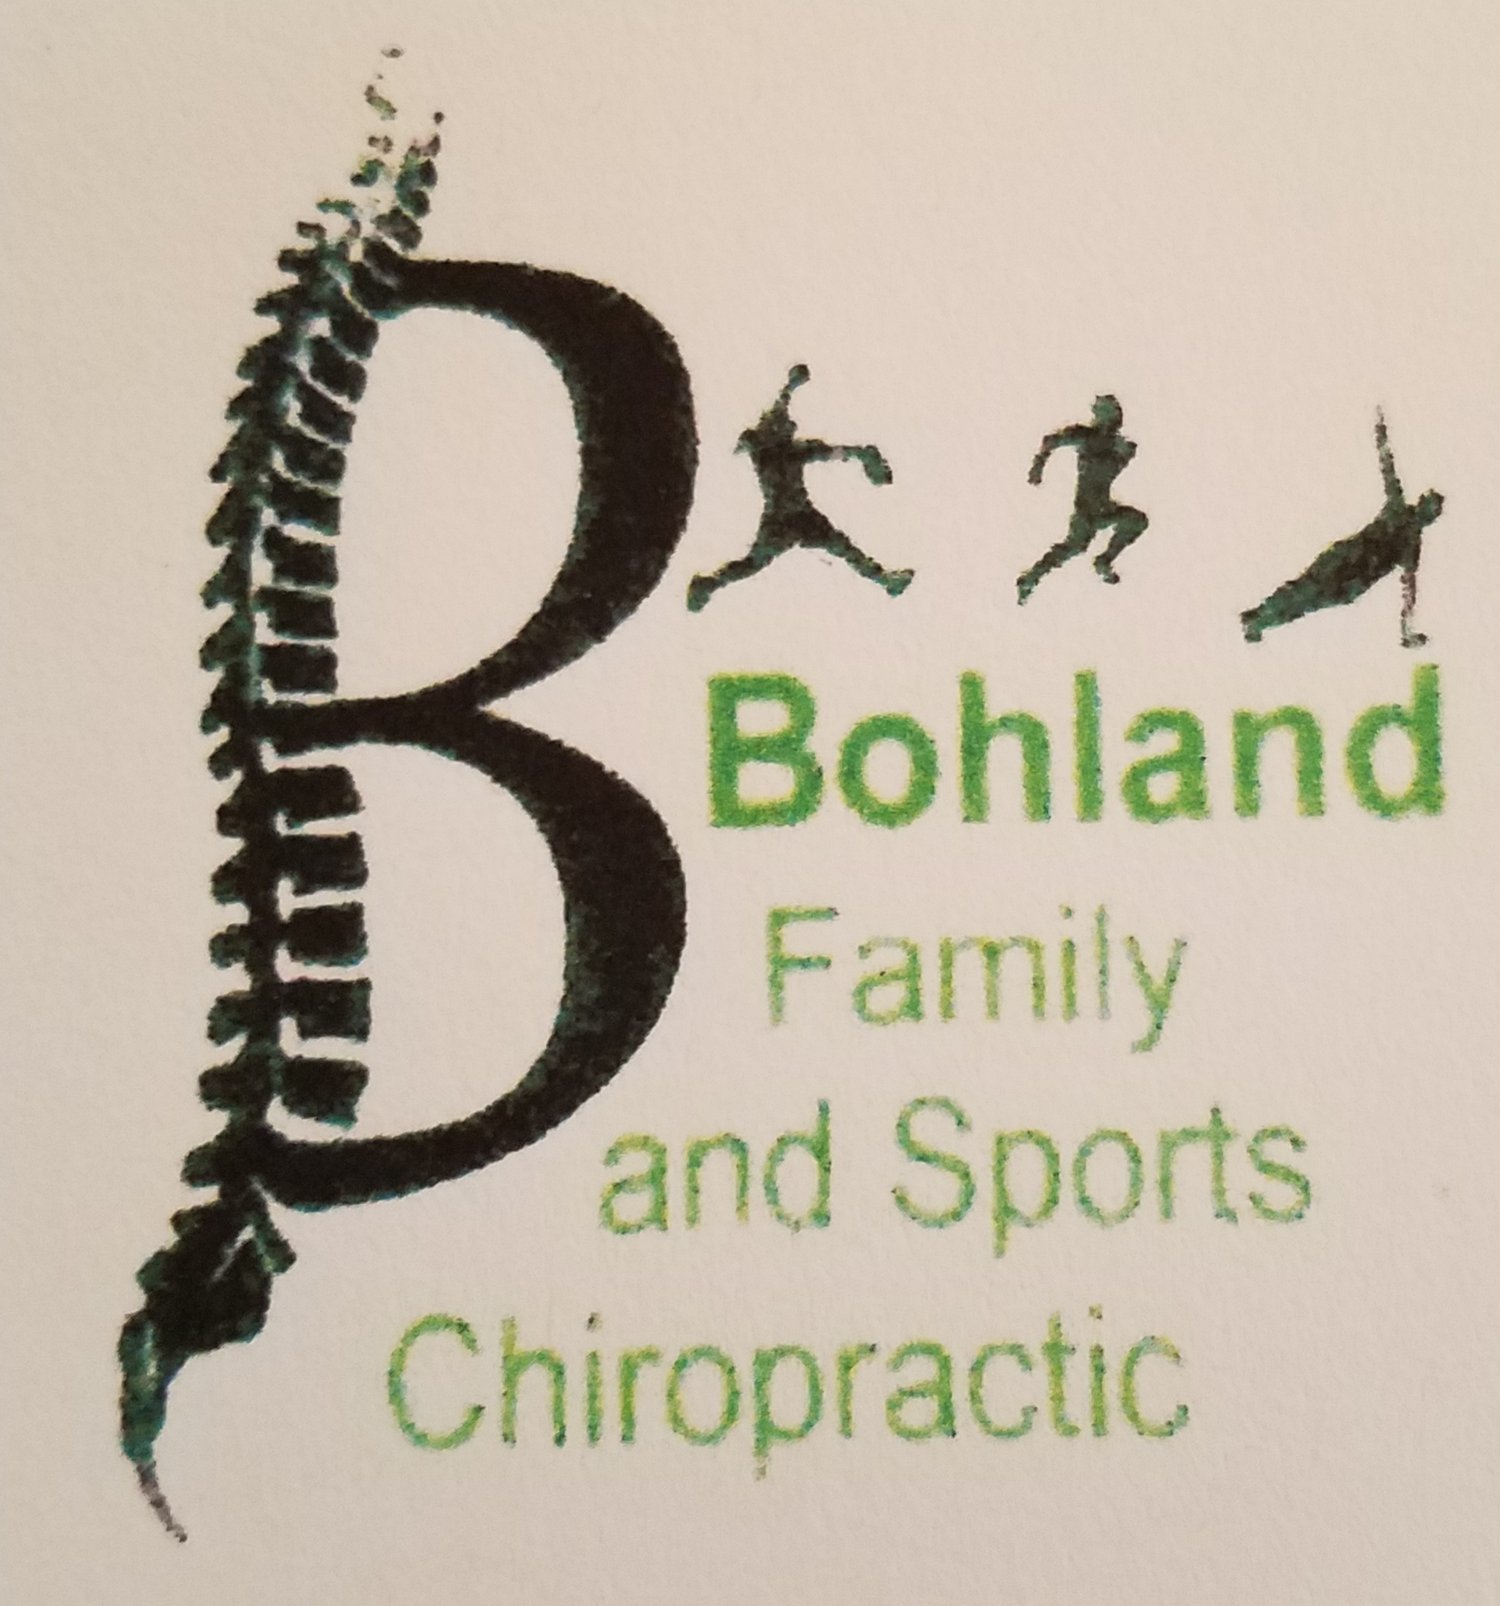 Bohland Family & Sports Chiropractic